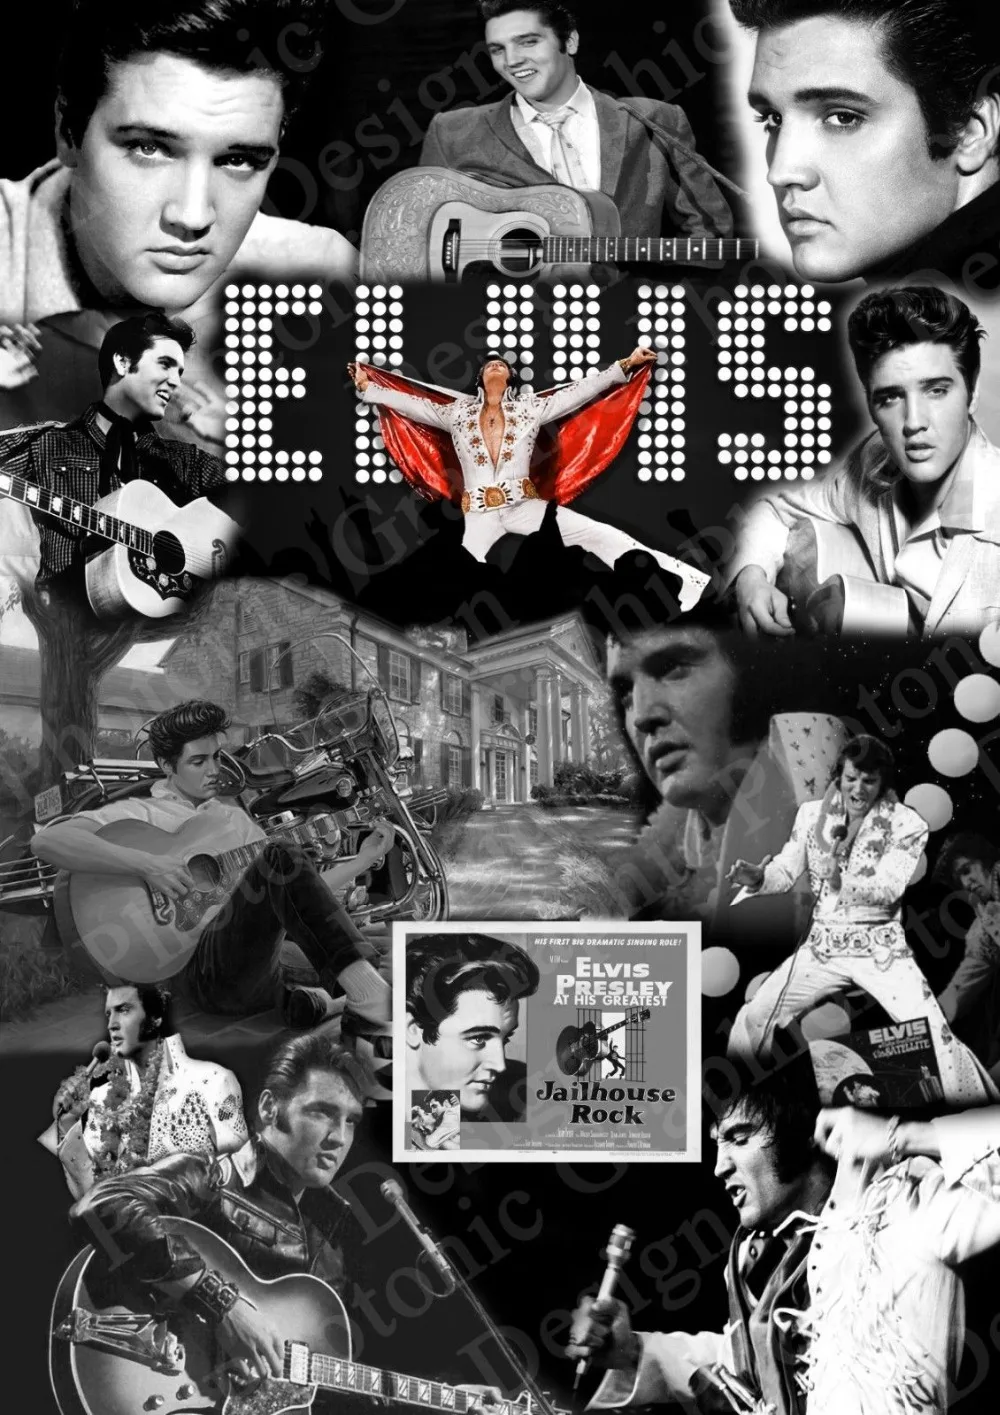 Elvis Presley Rock and Roll Music Star Silk Poster 13x18 24x32 inch 